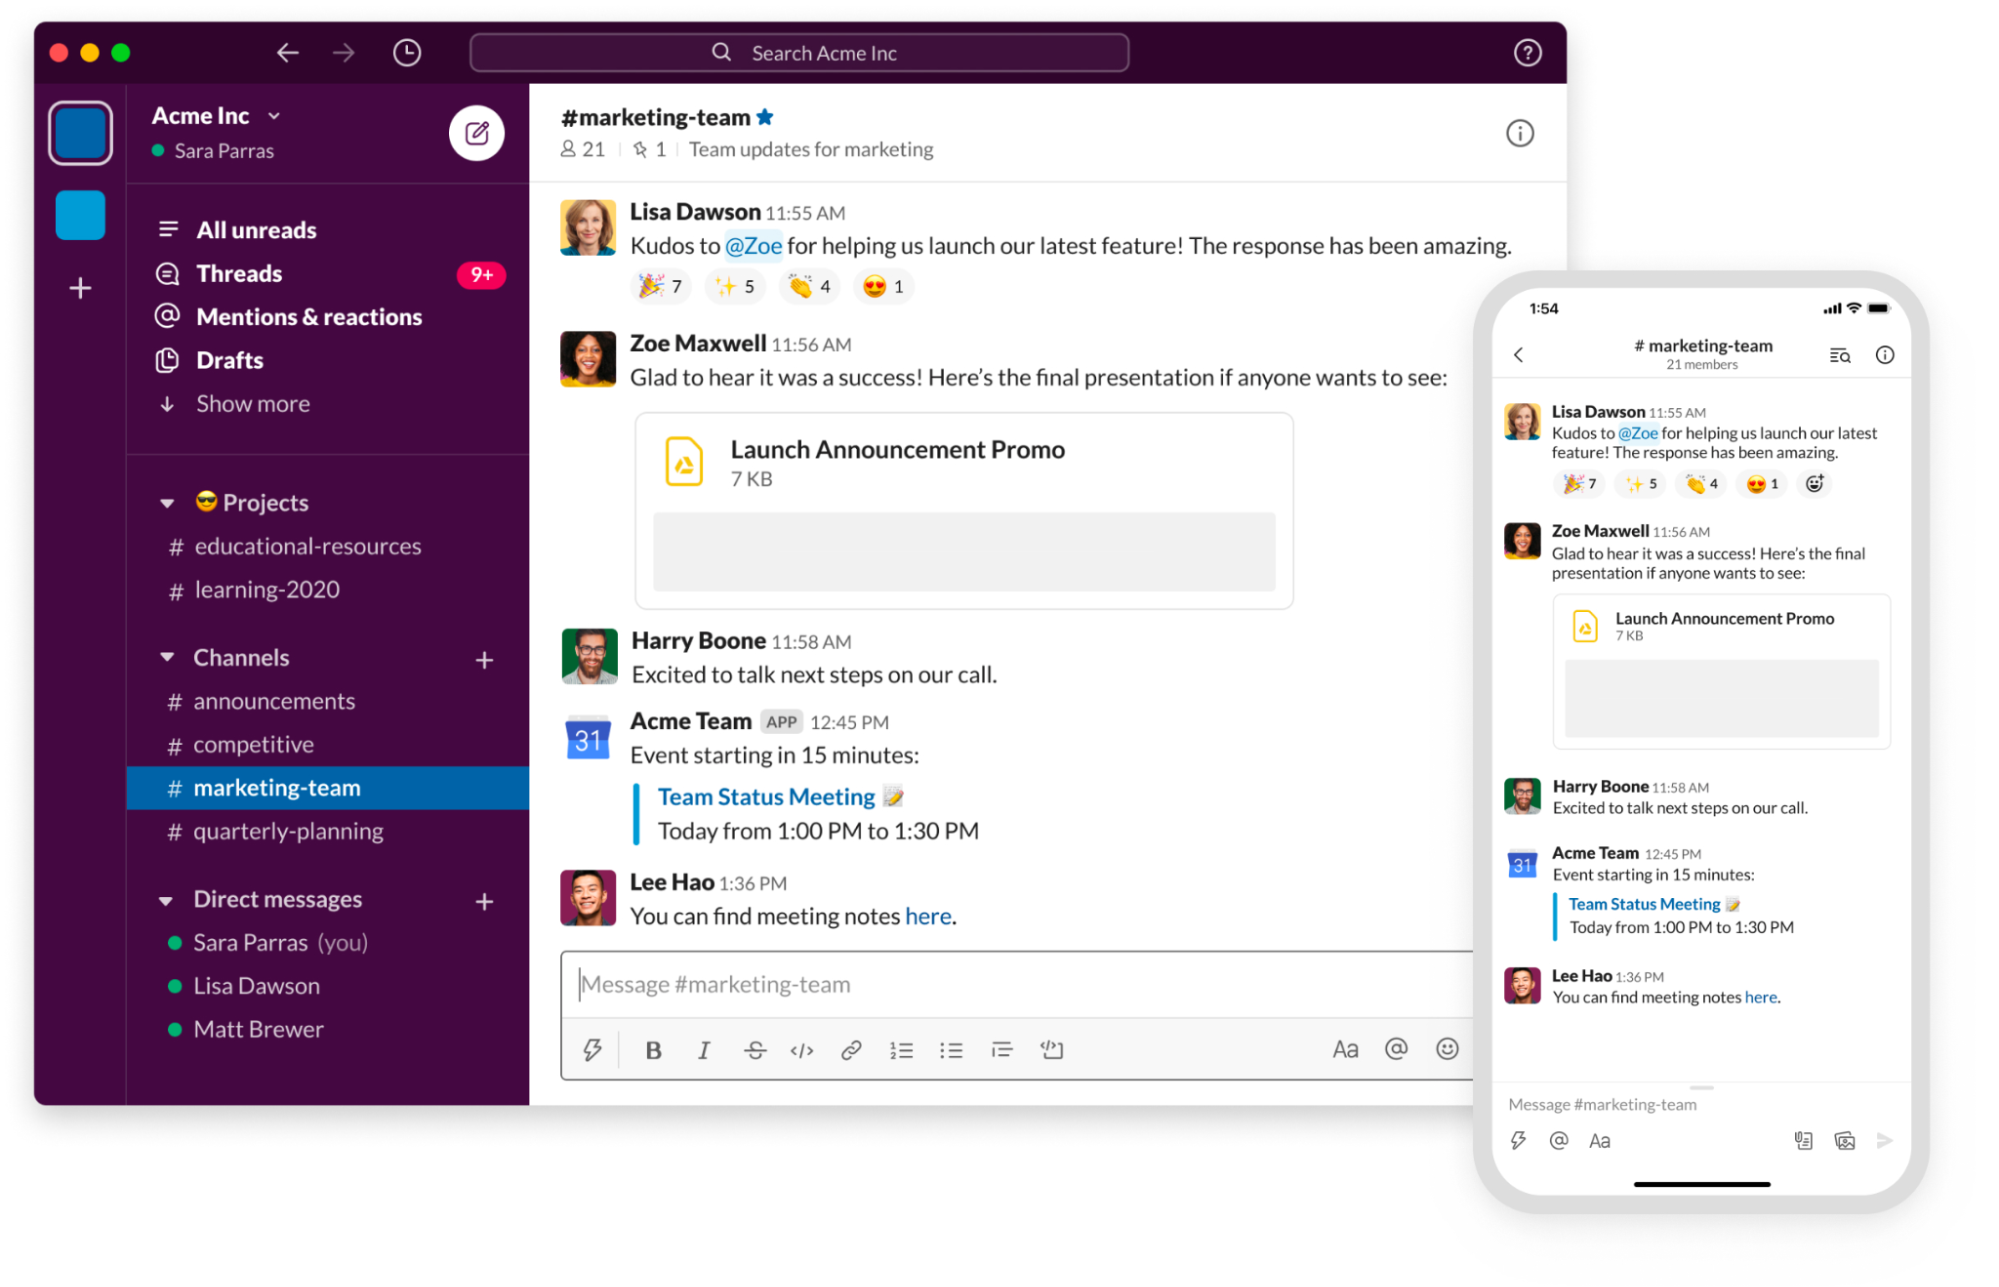 Slack makes it easy to stay on the same page and communicate with your team.